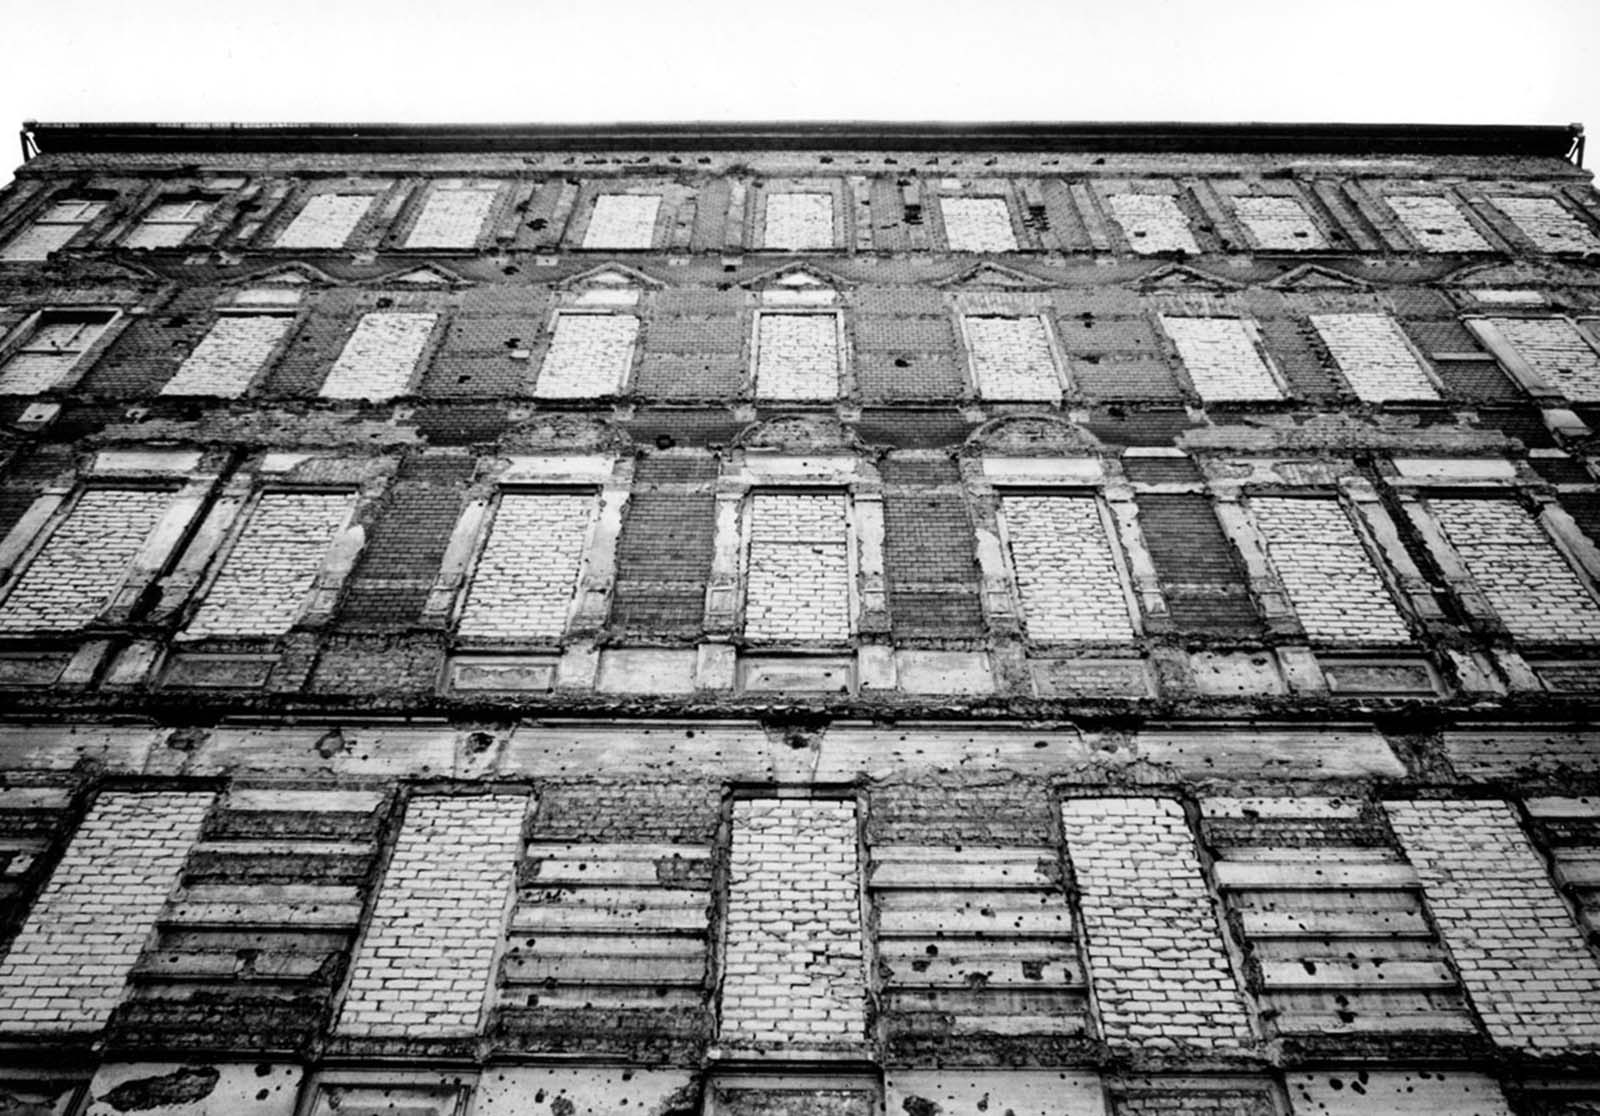 After East Germans jumped to freedom in the West, the windows of this building on the eastern side of the wall were bricked over. The building was later demolished. Photographed in 1962.